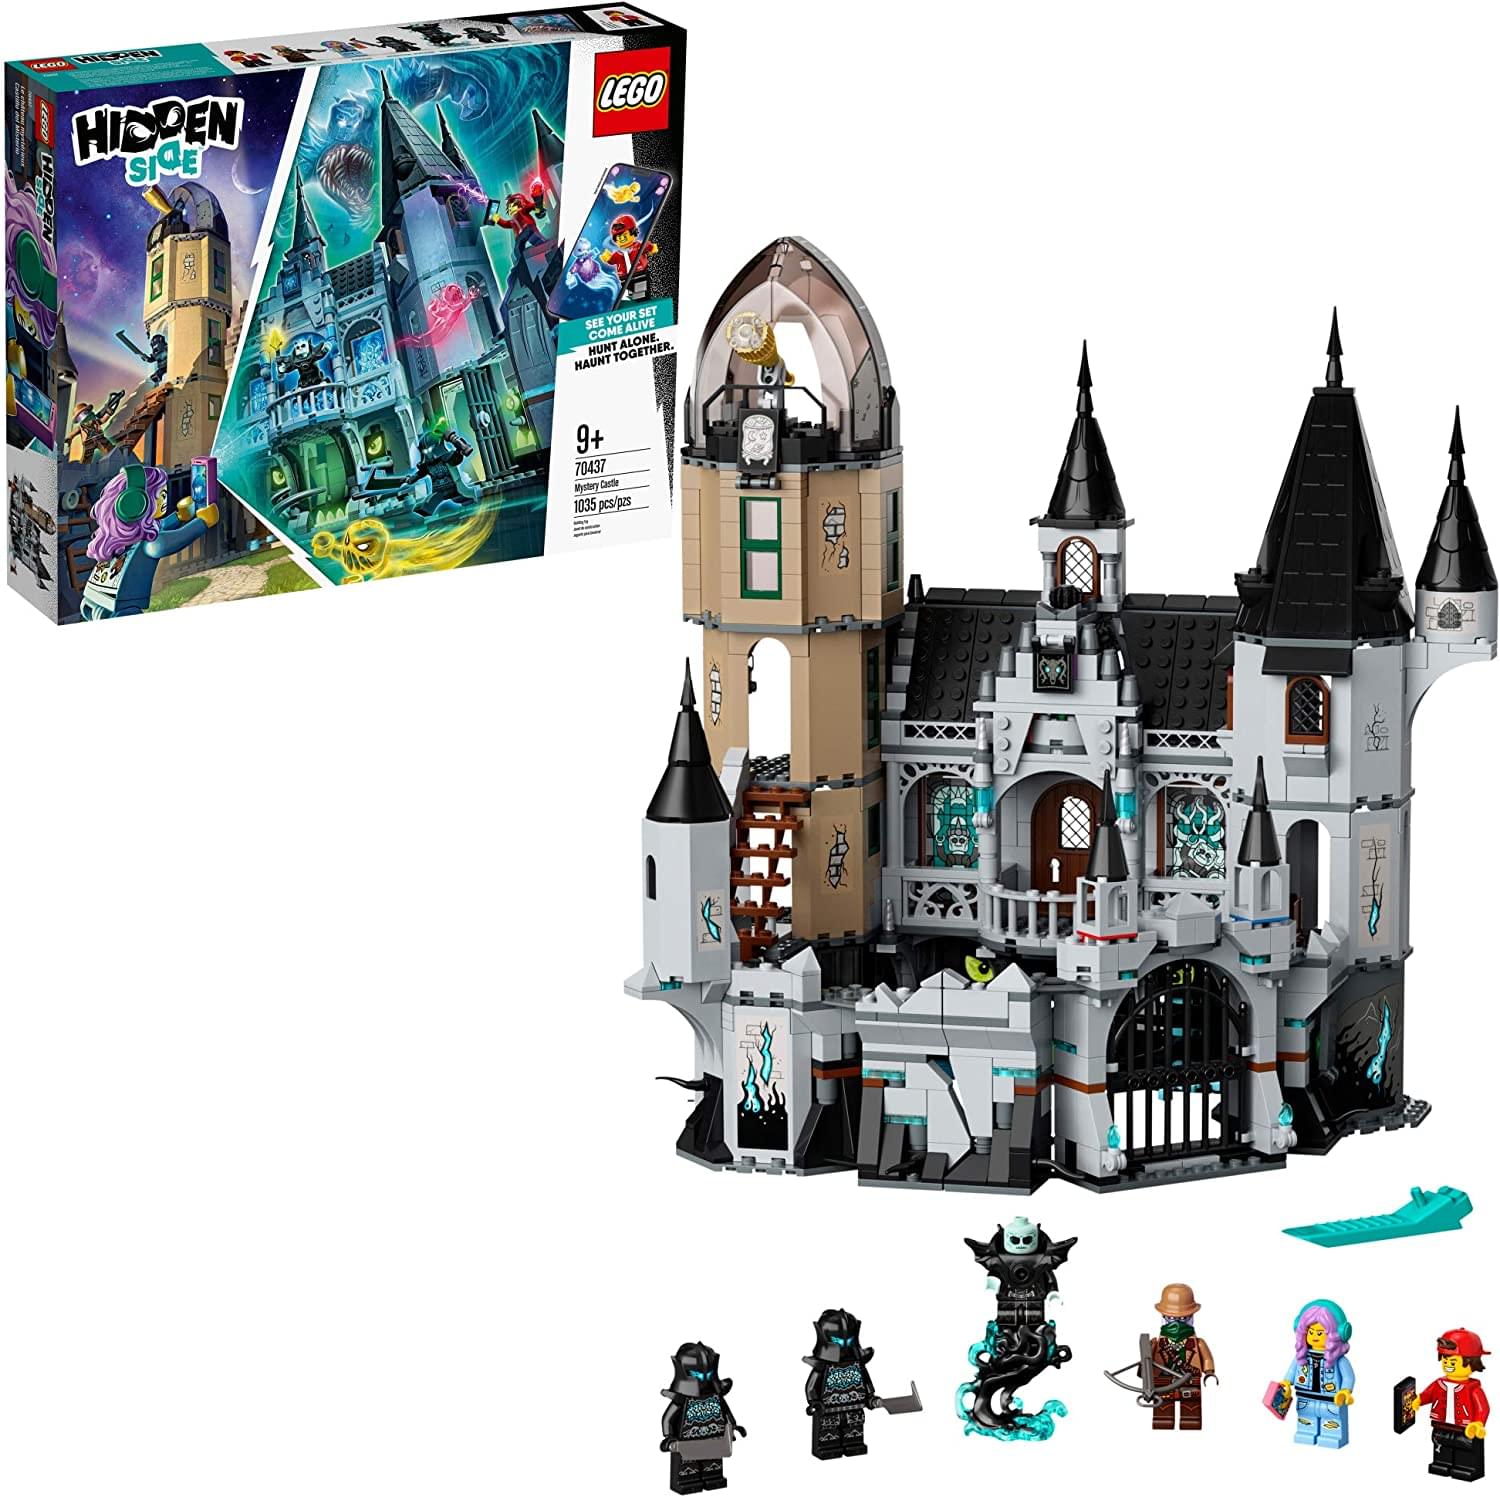 LEGO Hidden Side 70437 Mystery Castle Augmented Reality Building Set